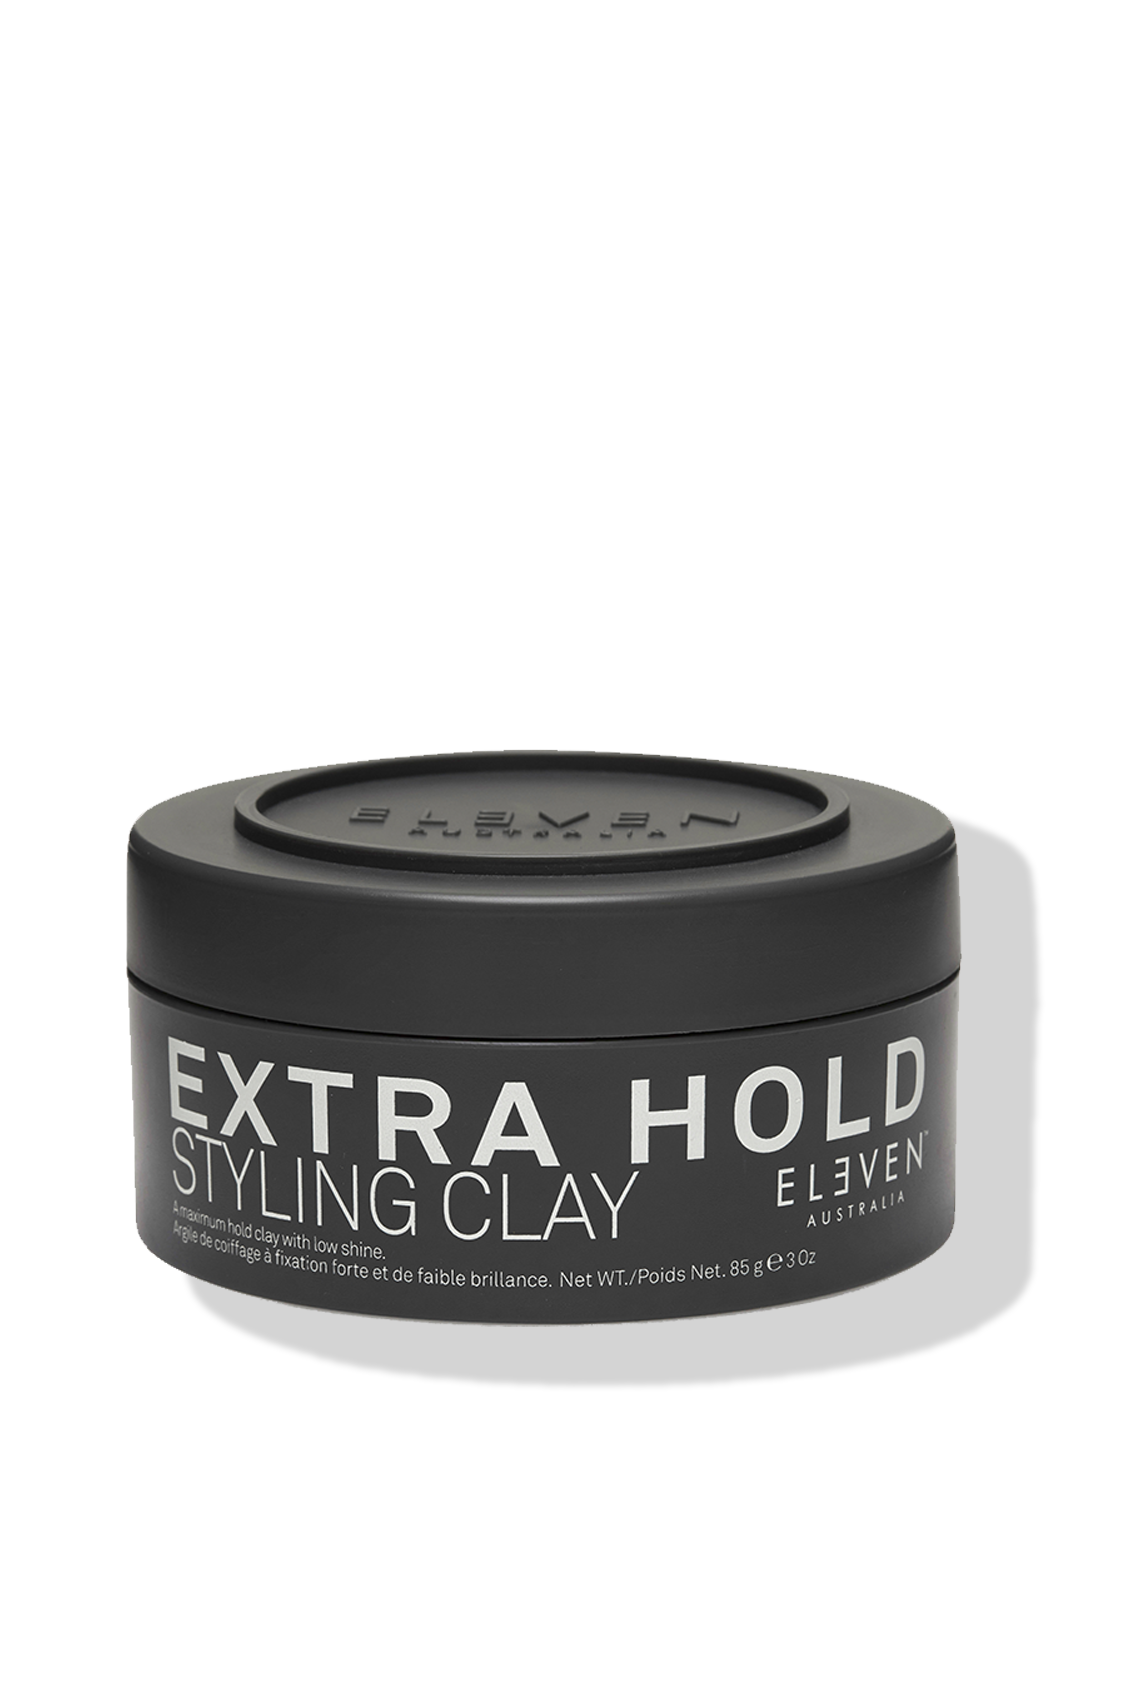 Eleven Australia extra hold styling clay